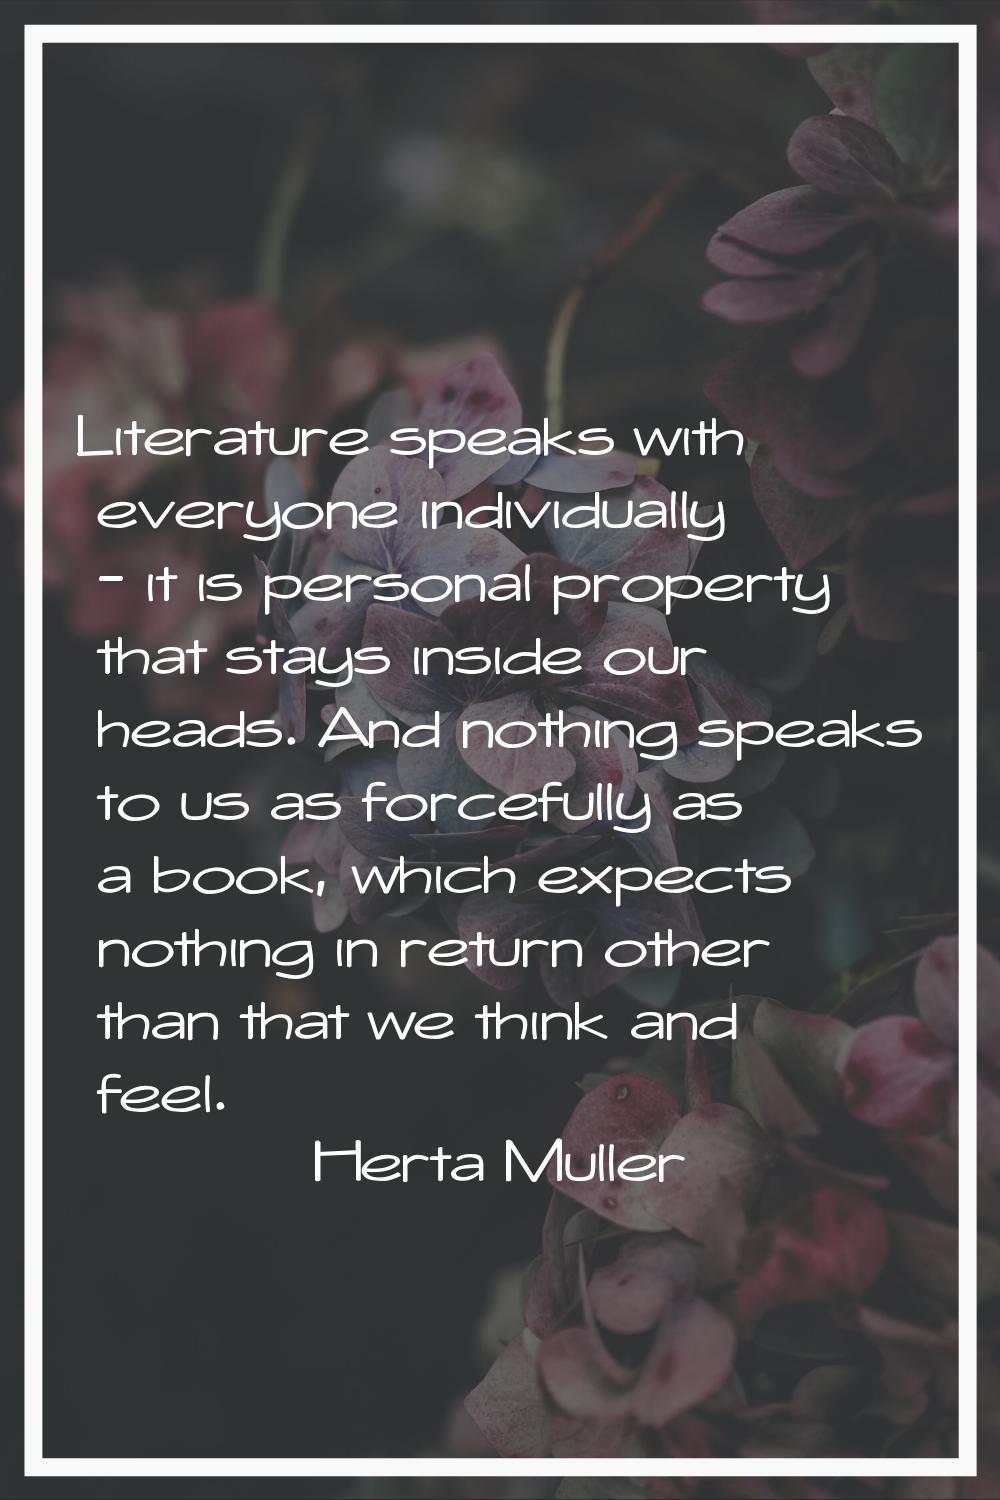 Literature speaks with everyone individually - it is personal property that stays inside our heads.